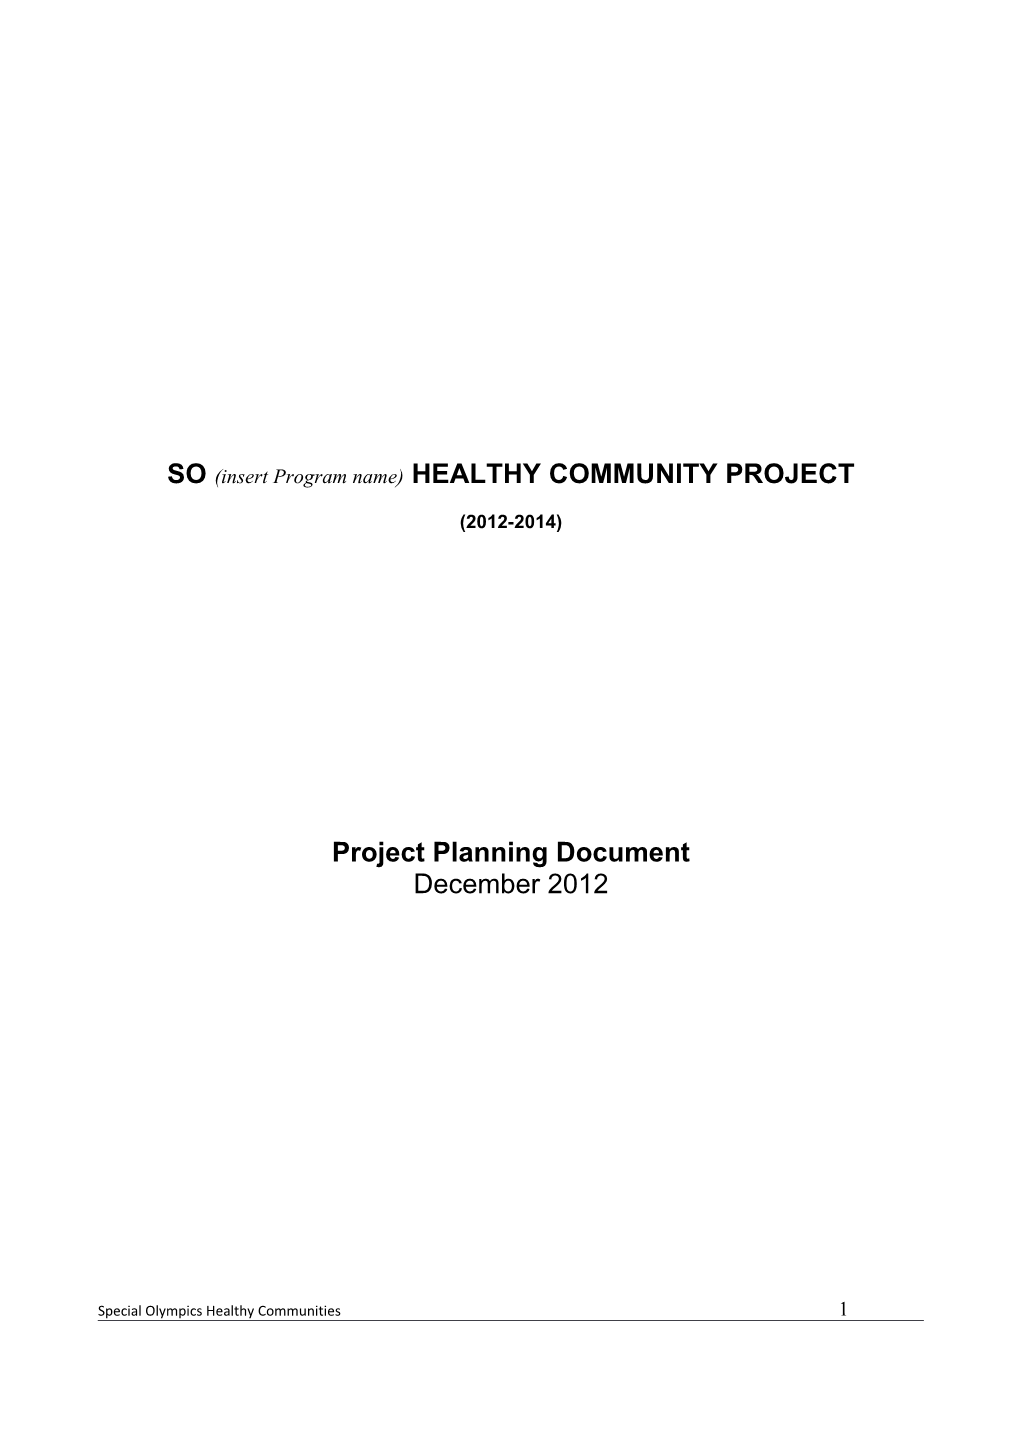 SO (Insert Program Name) Healthy Community Project